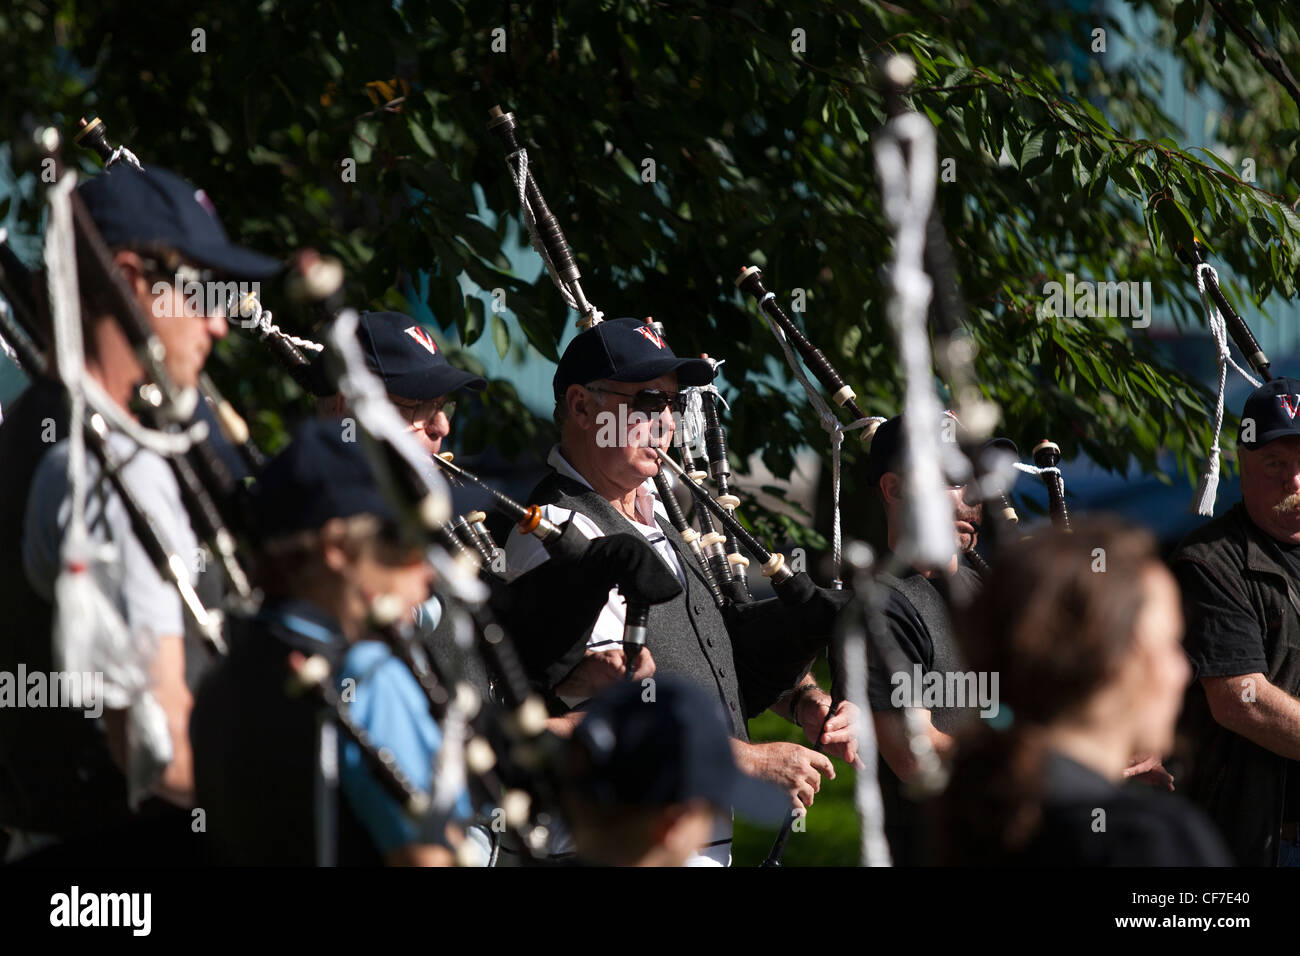 A group of pipers practice playing bagpipes in a Glasgow public park. Stock Photo